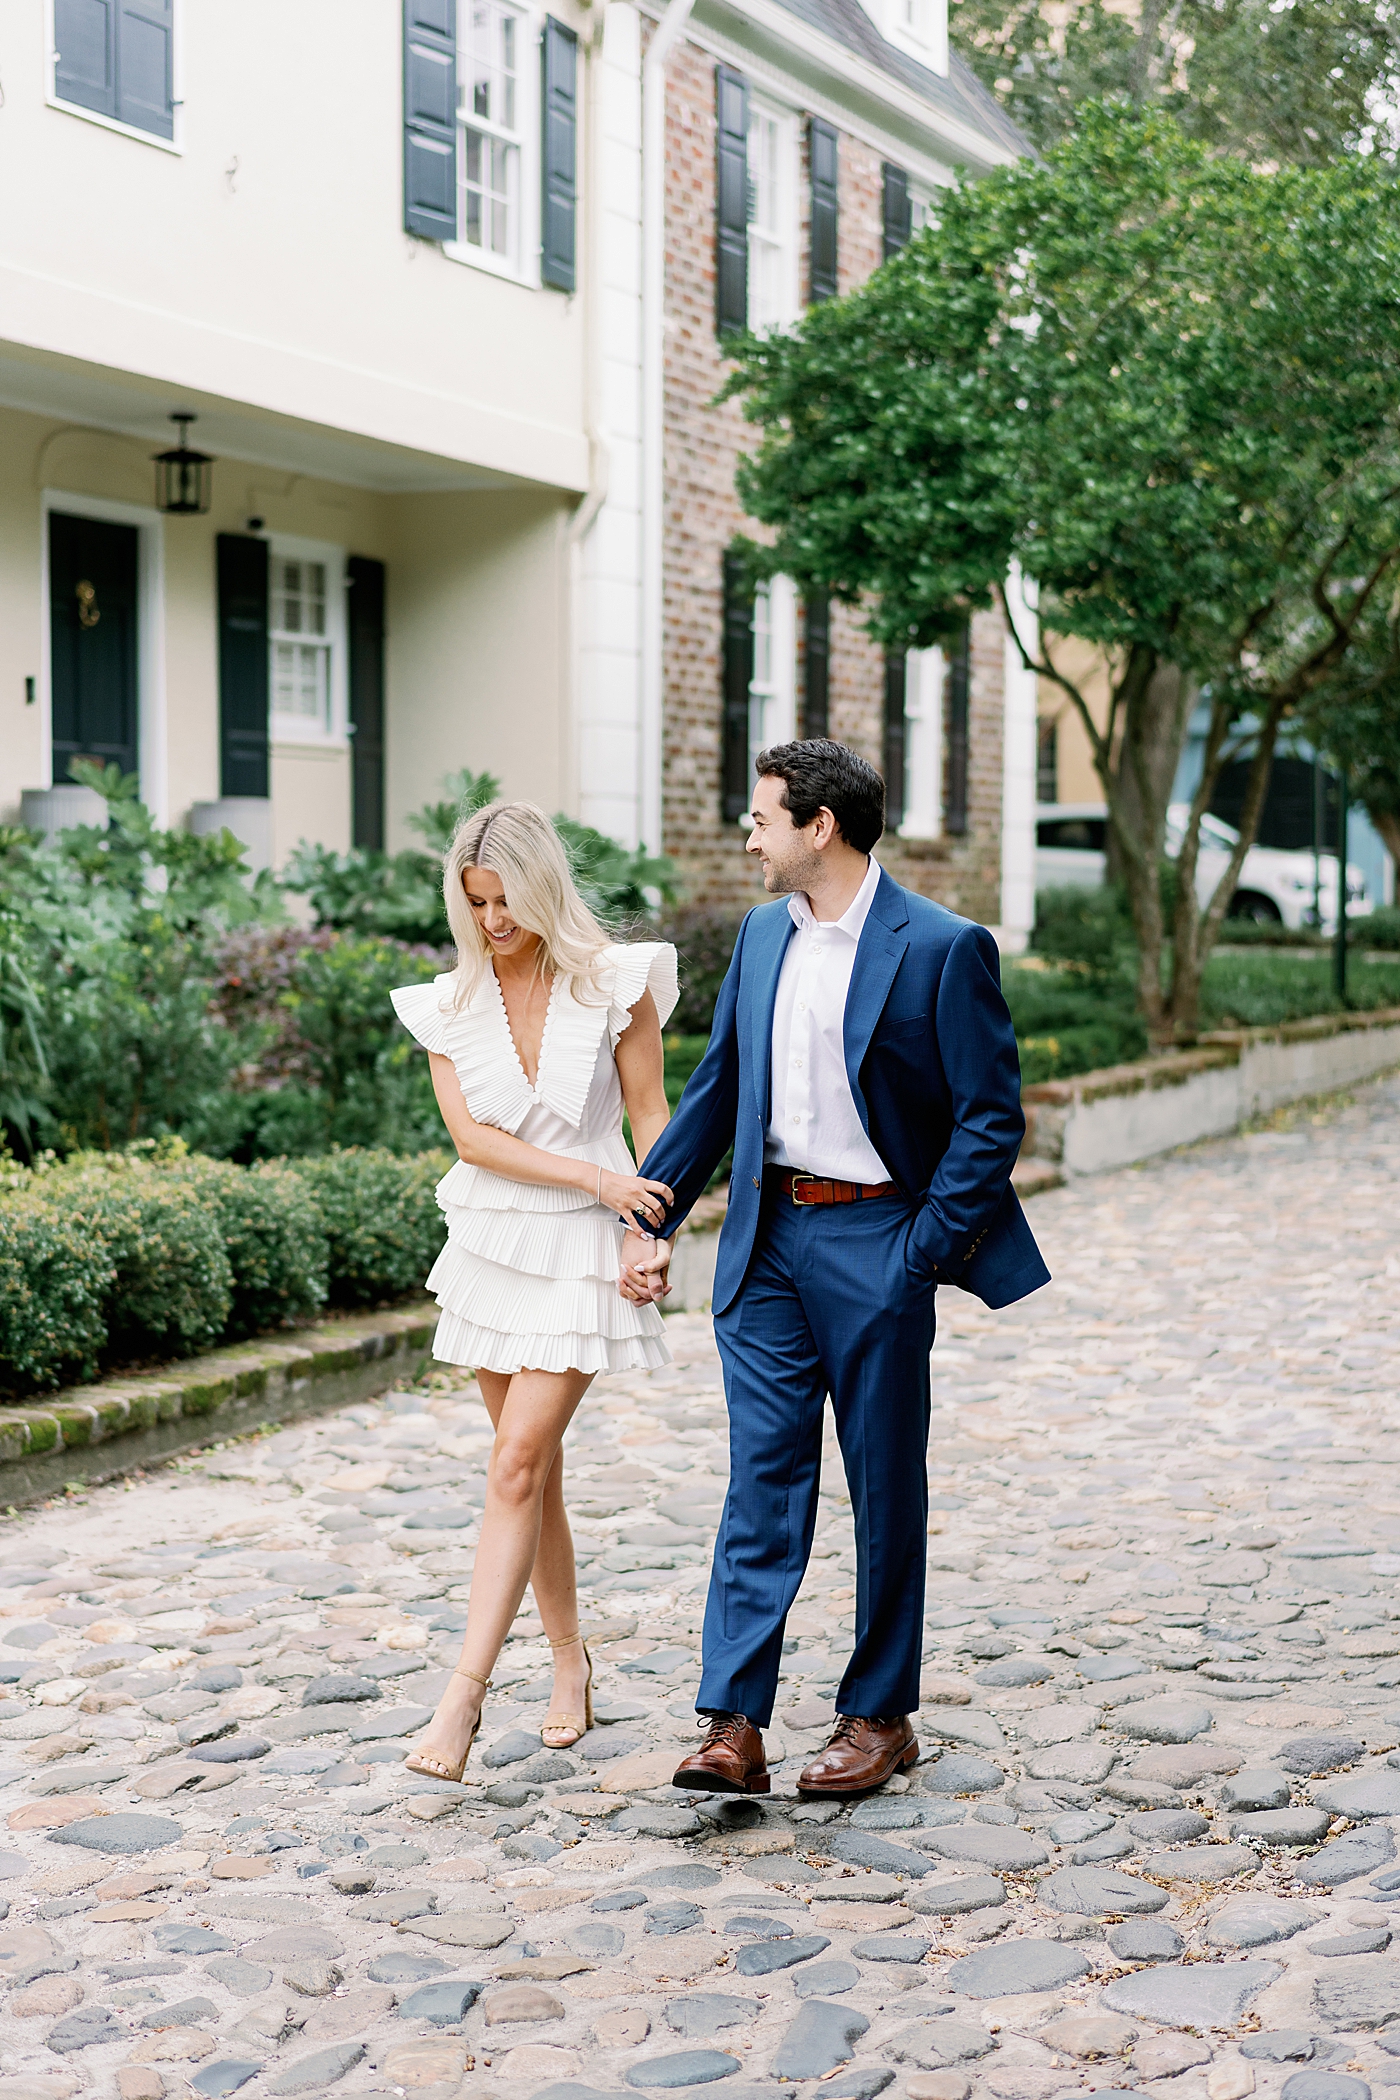 Couple holding hands walking on cobblestone street | Image by Annie Laura Photo